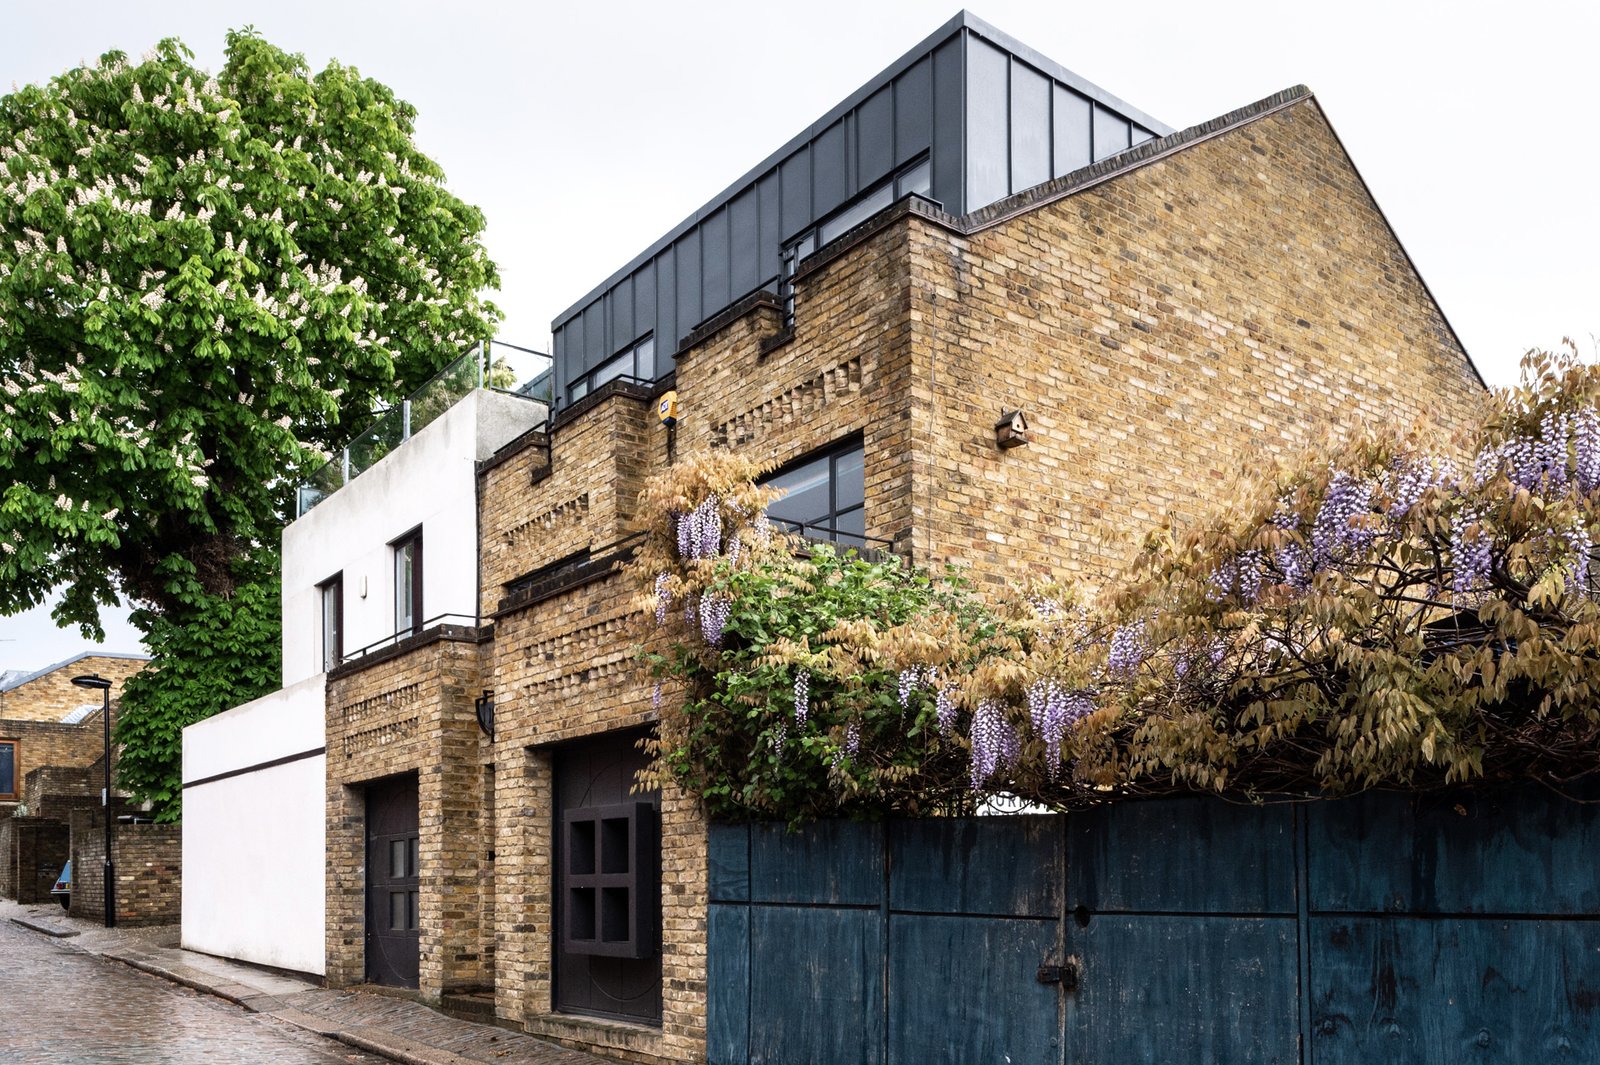 Murray Mews is known for homes by well-known architects. It features early works from Team 4, the ’60s-era firm of Richard Rogers and Norman Foster.